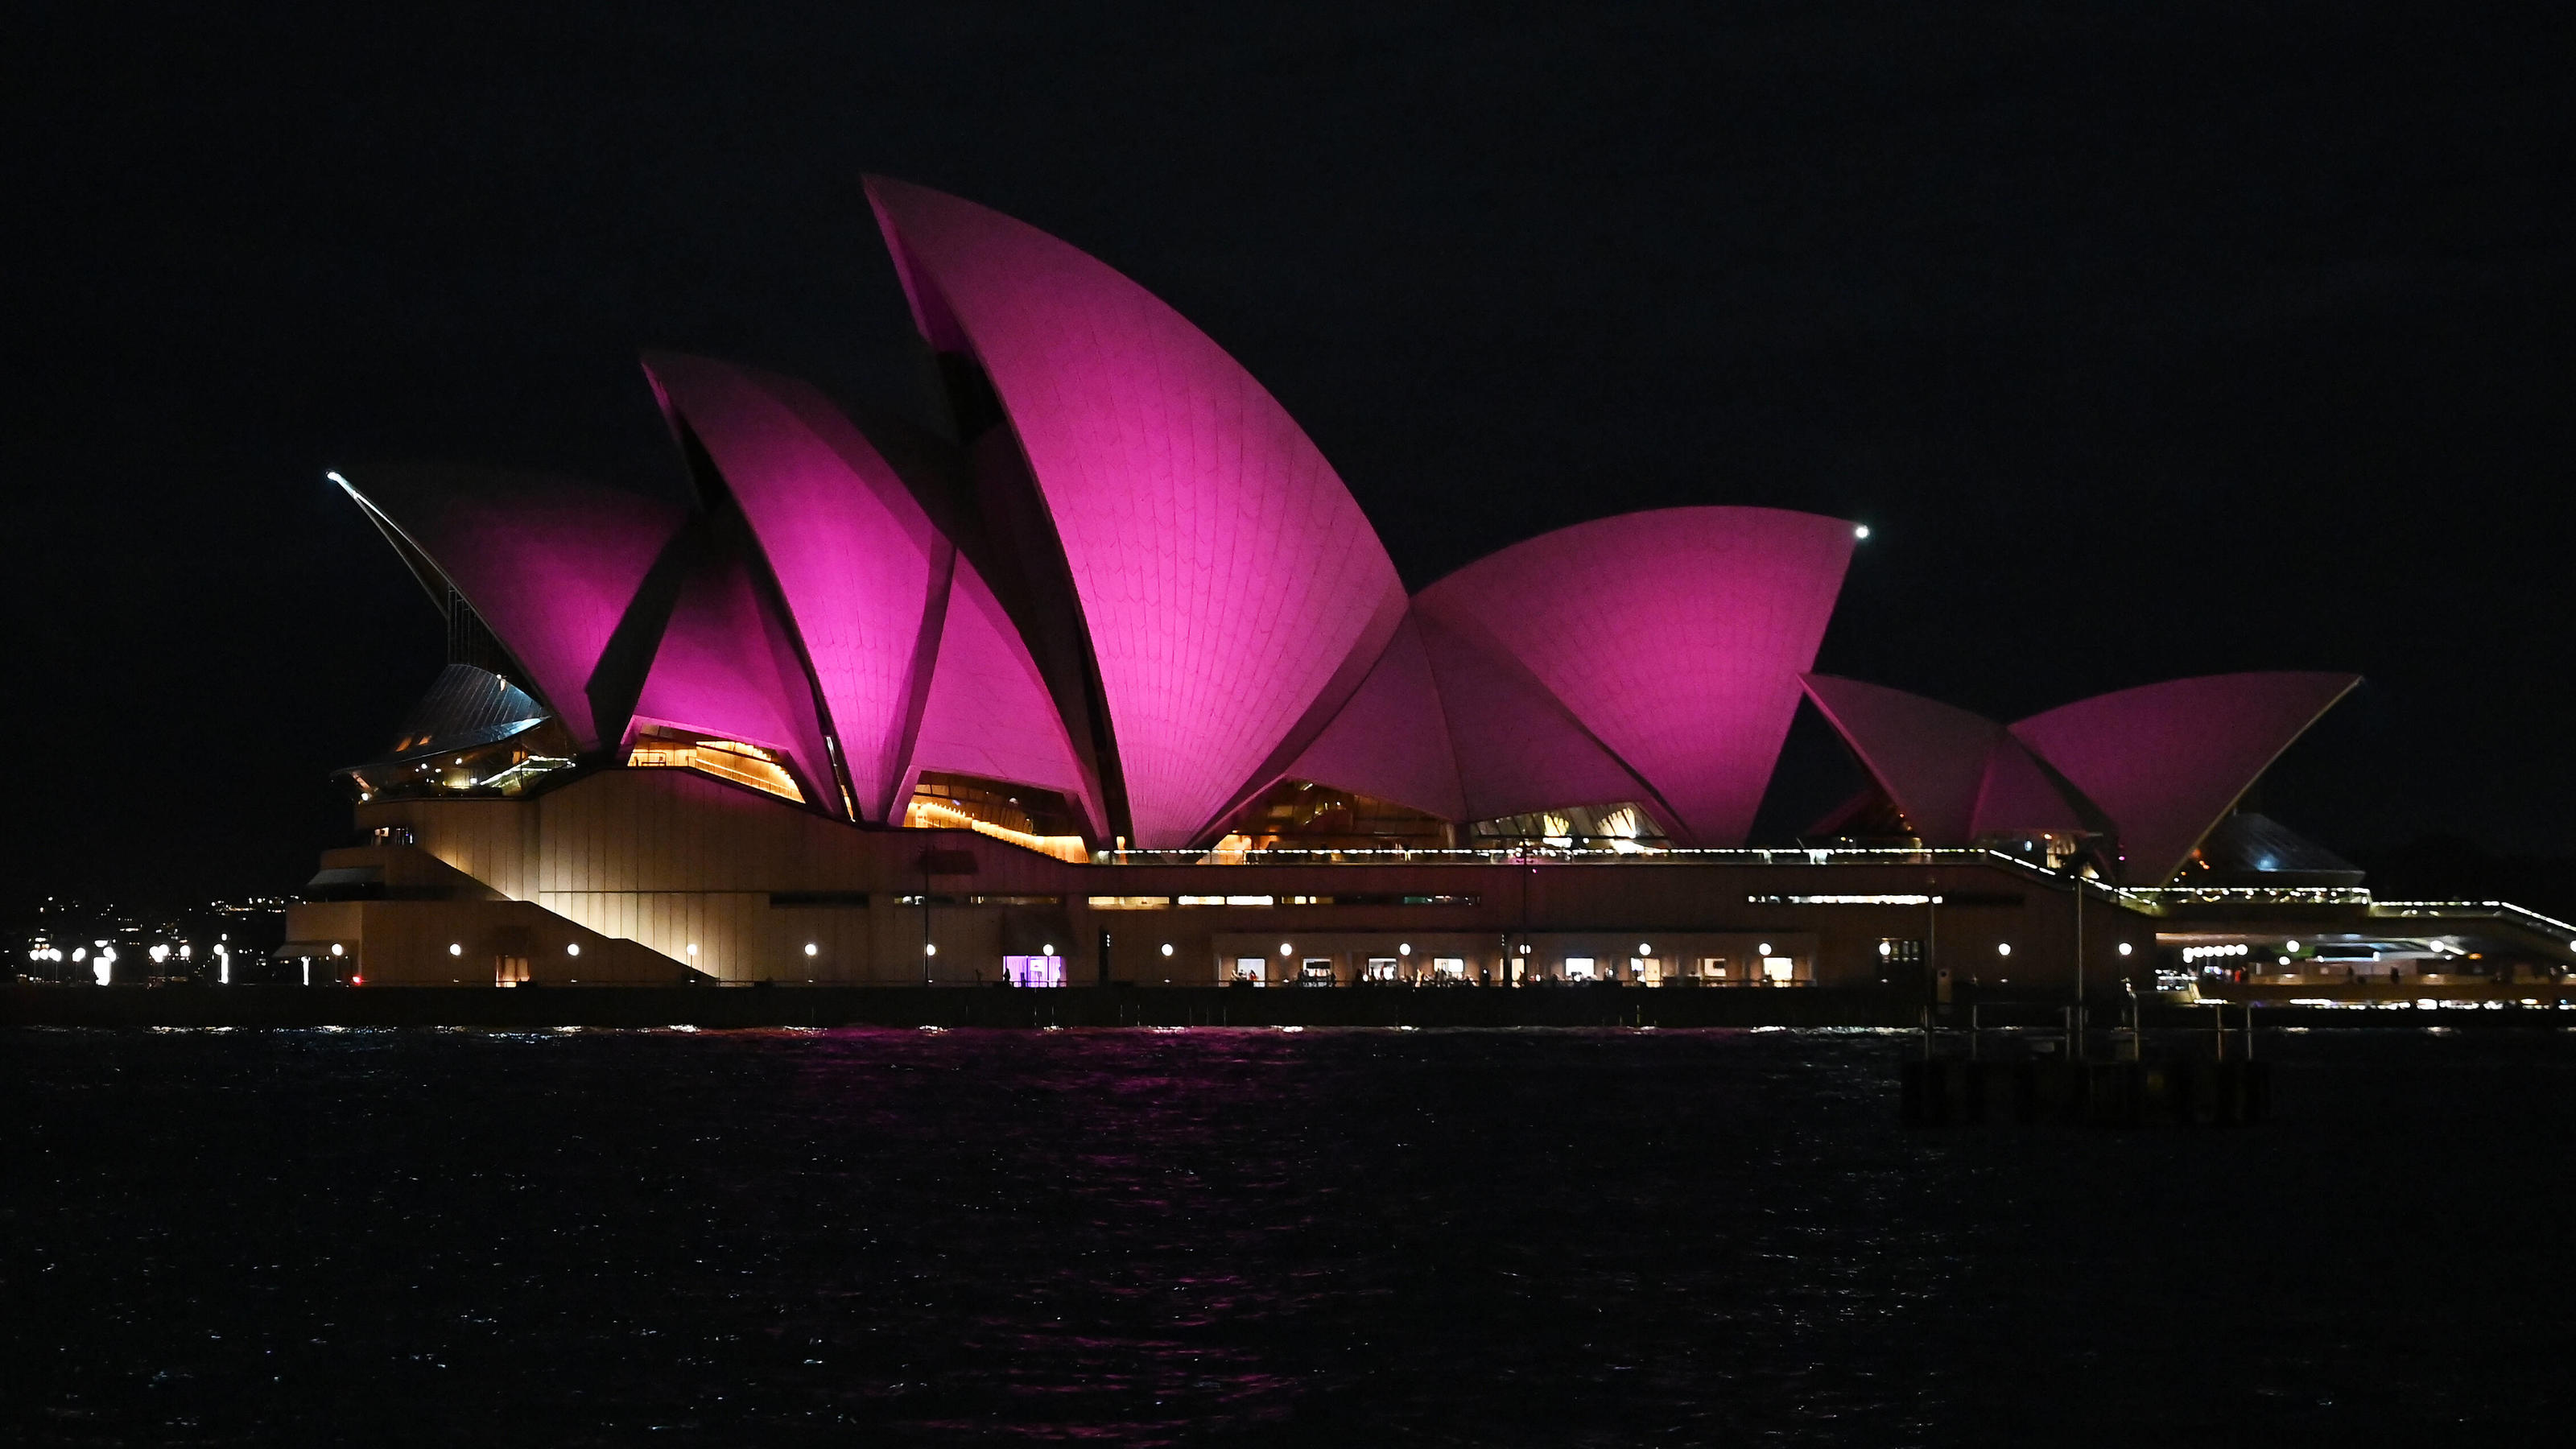  OLIVIA NEWTON JOHN OPERA HOUSE SAILS, The sails of the Sydney Opera House are lit up with the colour pink as a tribute to Olivia Newton-John, Sydney, Wednesday, August 10, 2022. Olivia Newton-John, the singing superstar who won viewers hearts as San